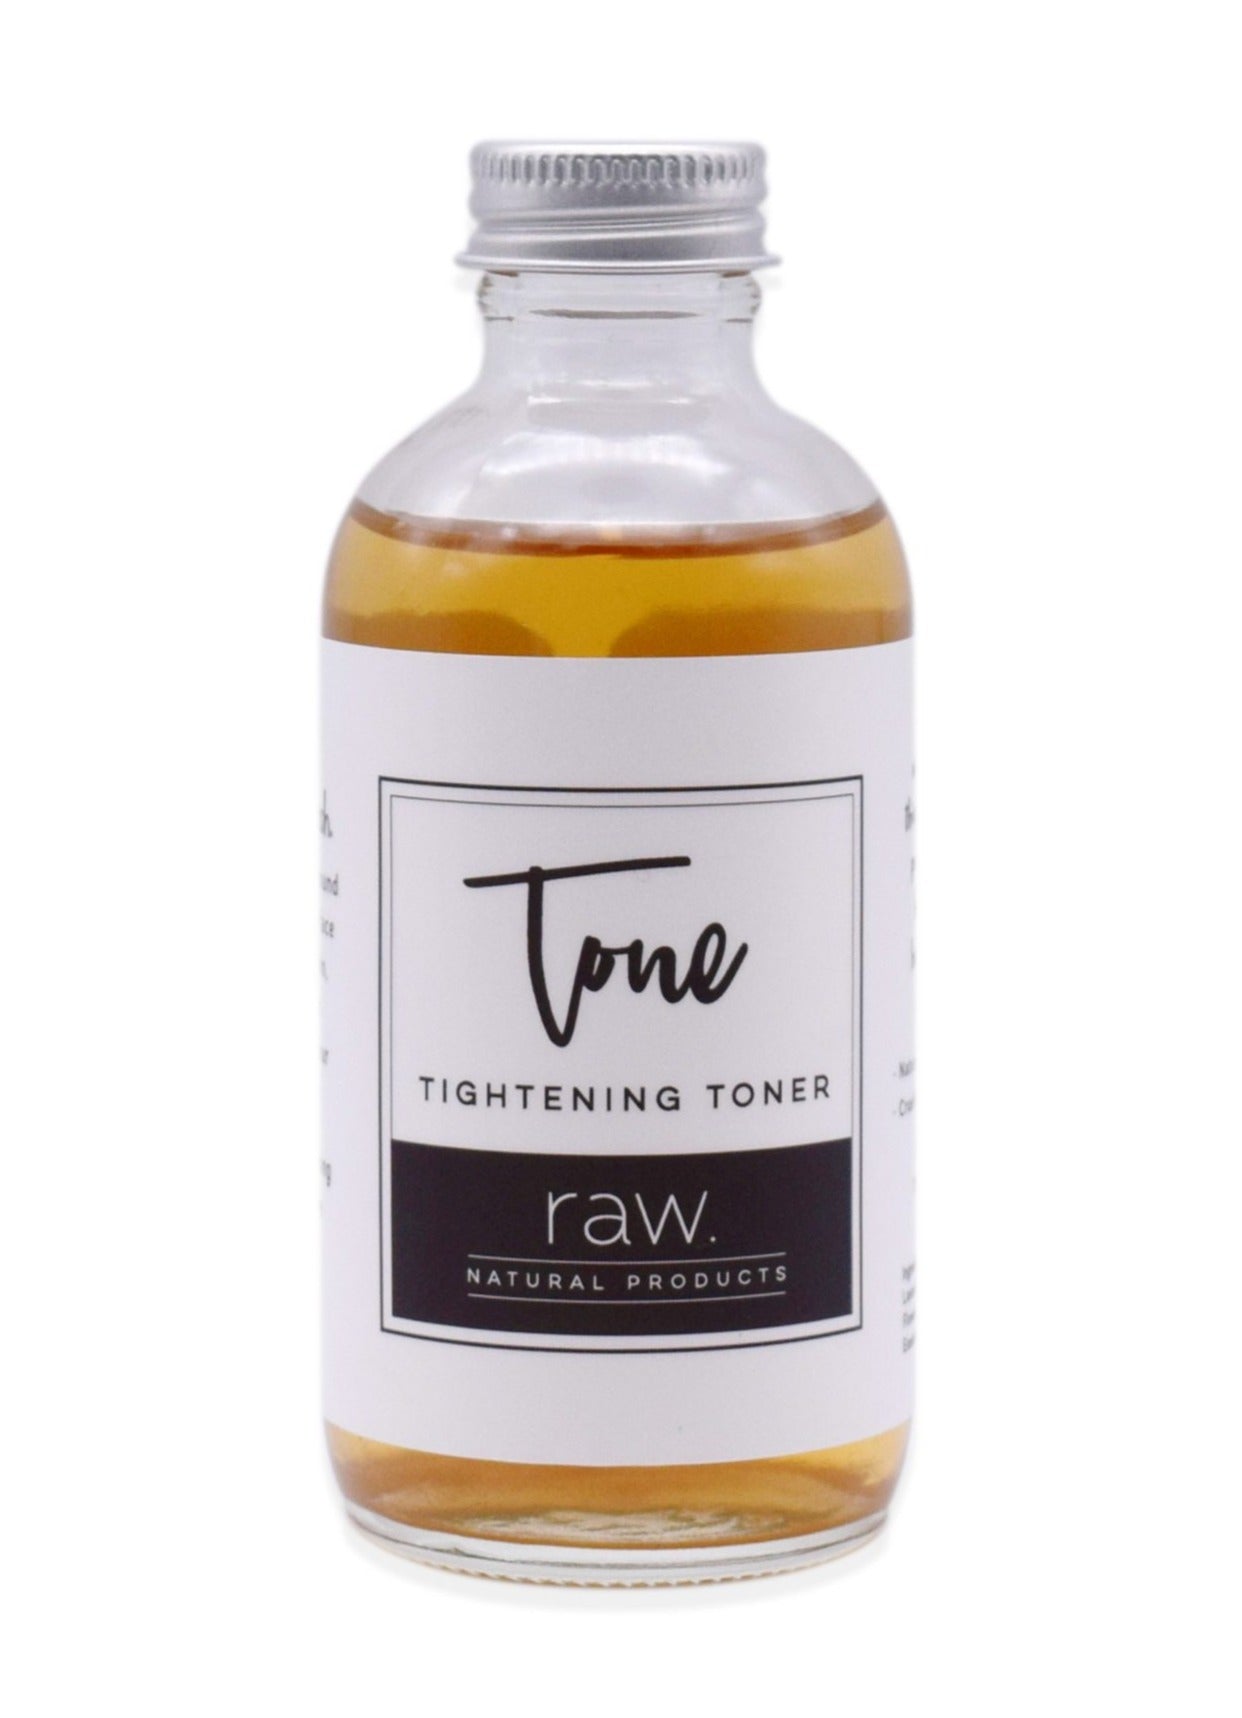 Tone Facial Tightening Toner - FINAL SALE Home & Lifestyle